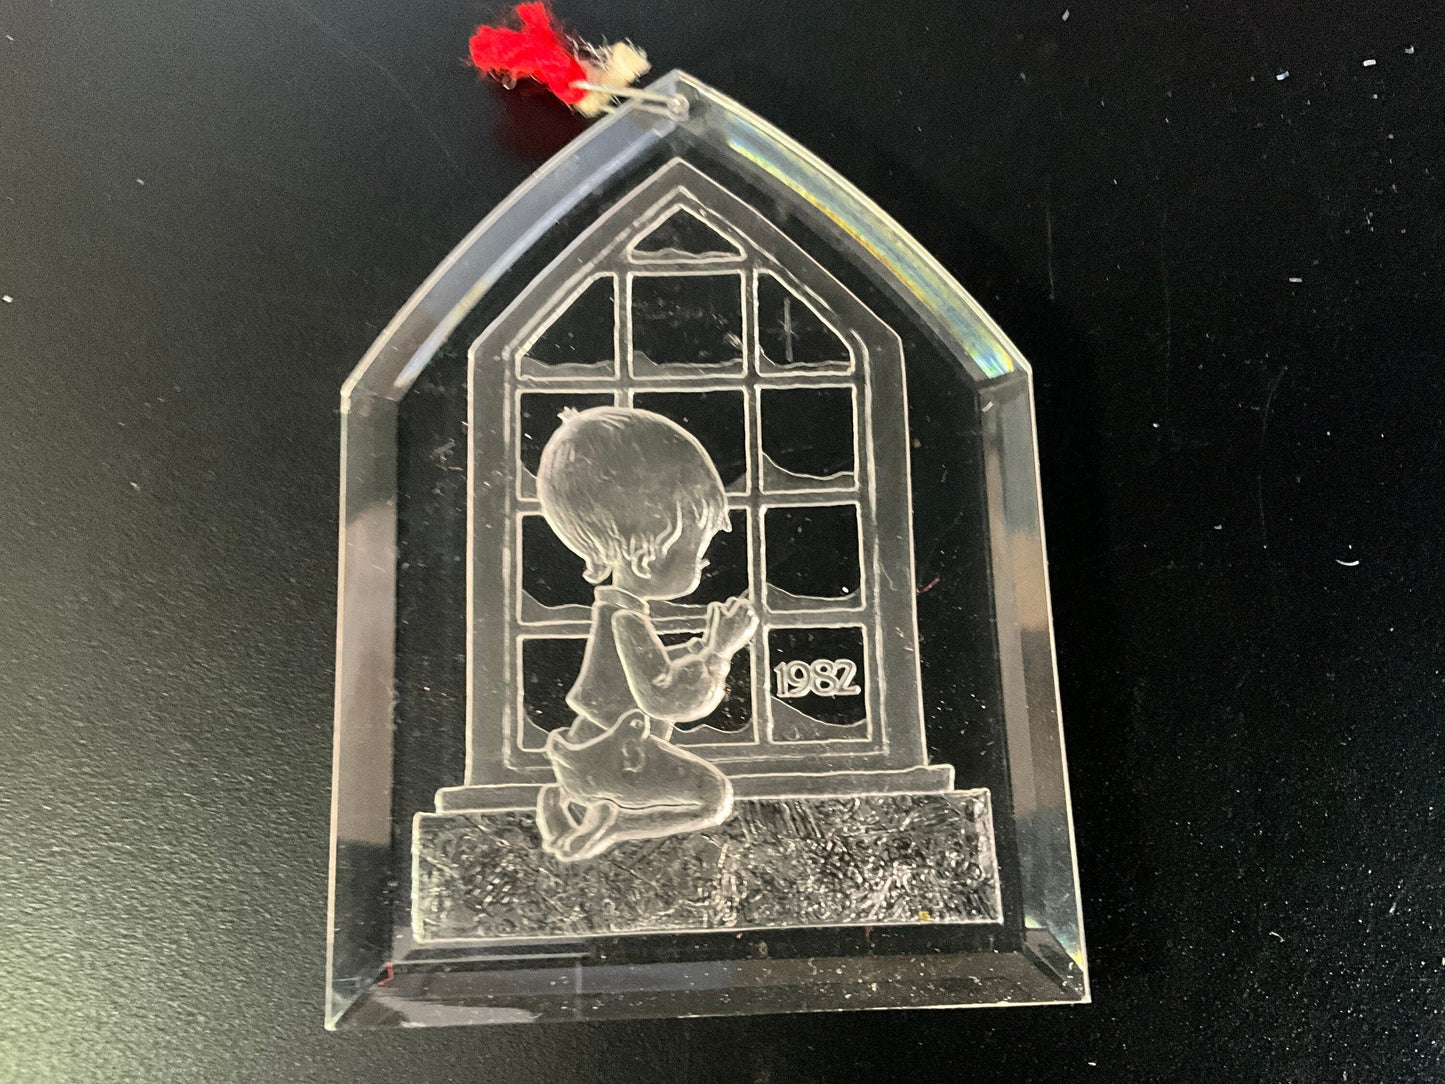 Christmas Treasure child in prayer vintage 1982 clear acrylic ornament with red felt cover